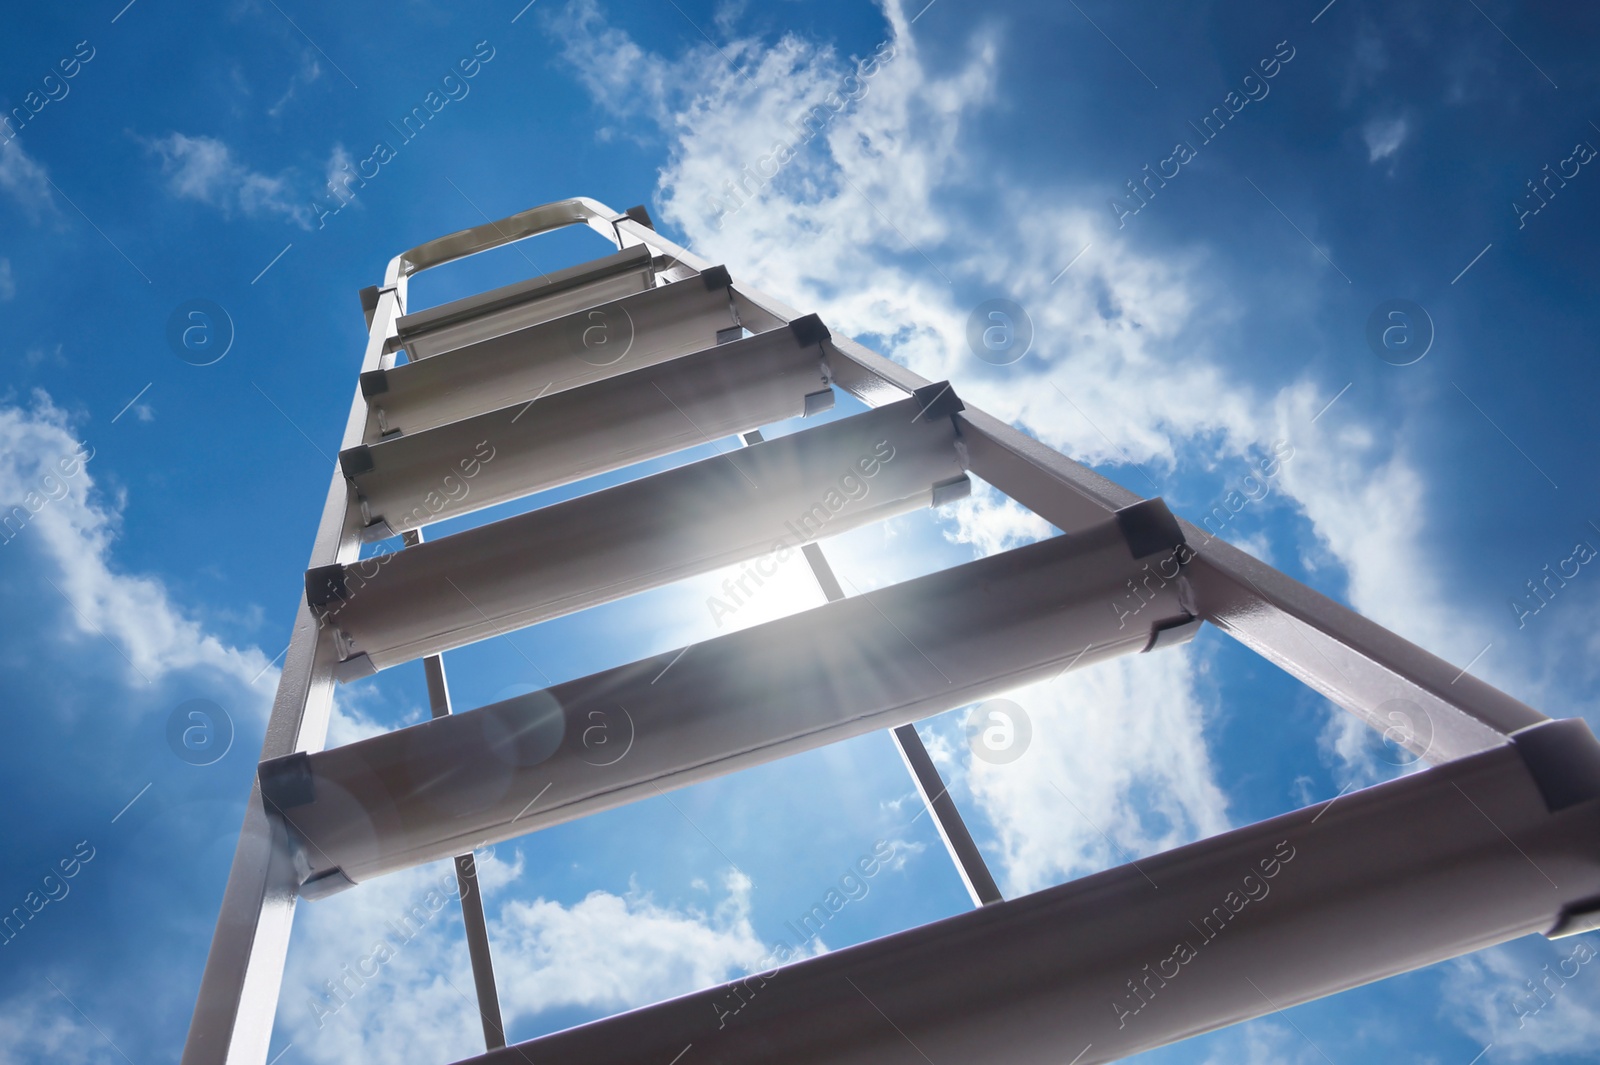 Image of Metal stepladder against blue sky with clouds, low angle view